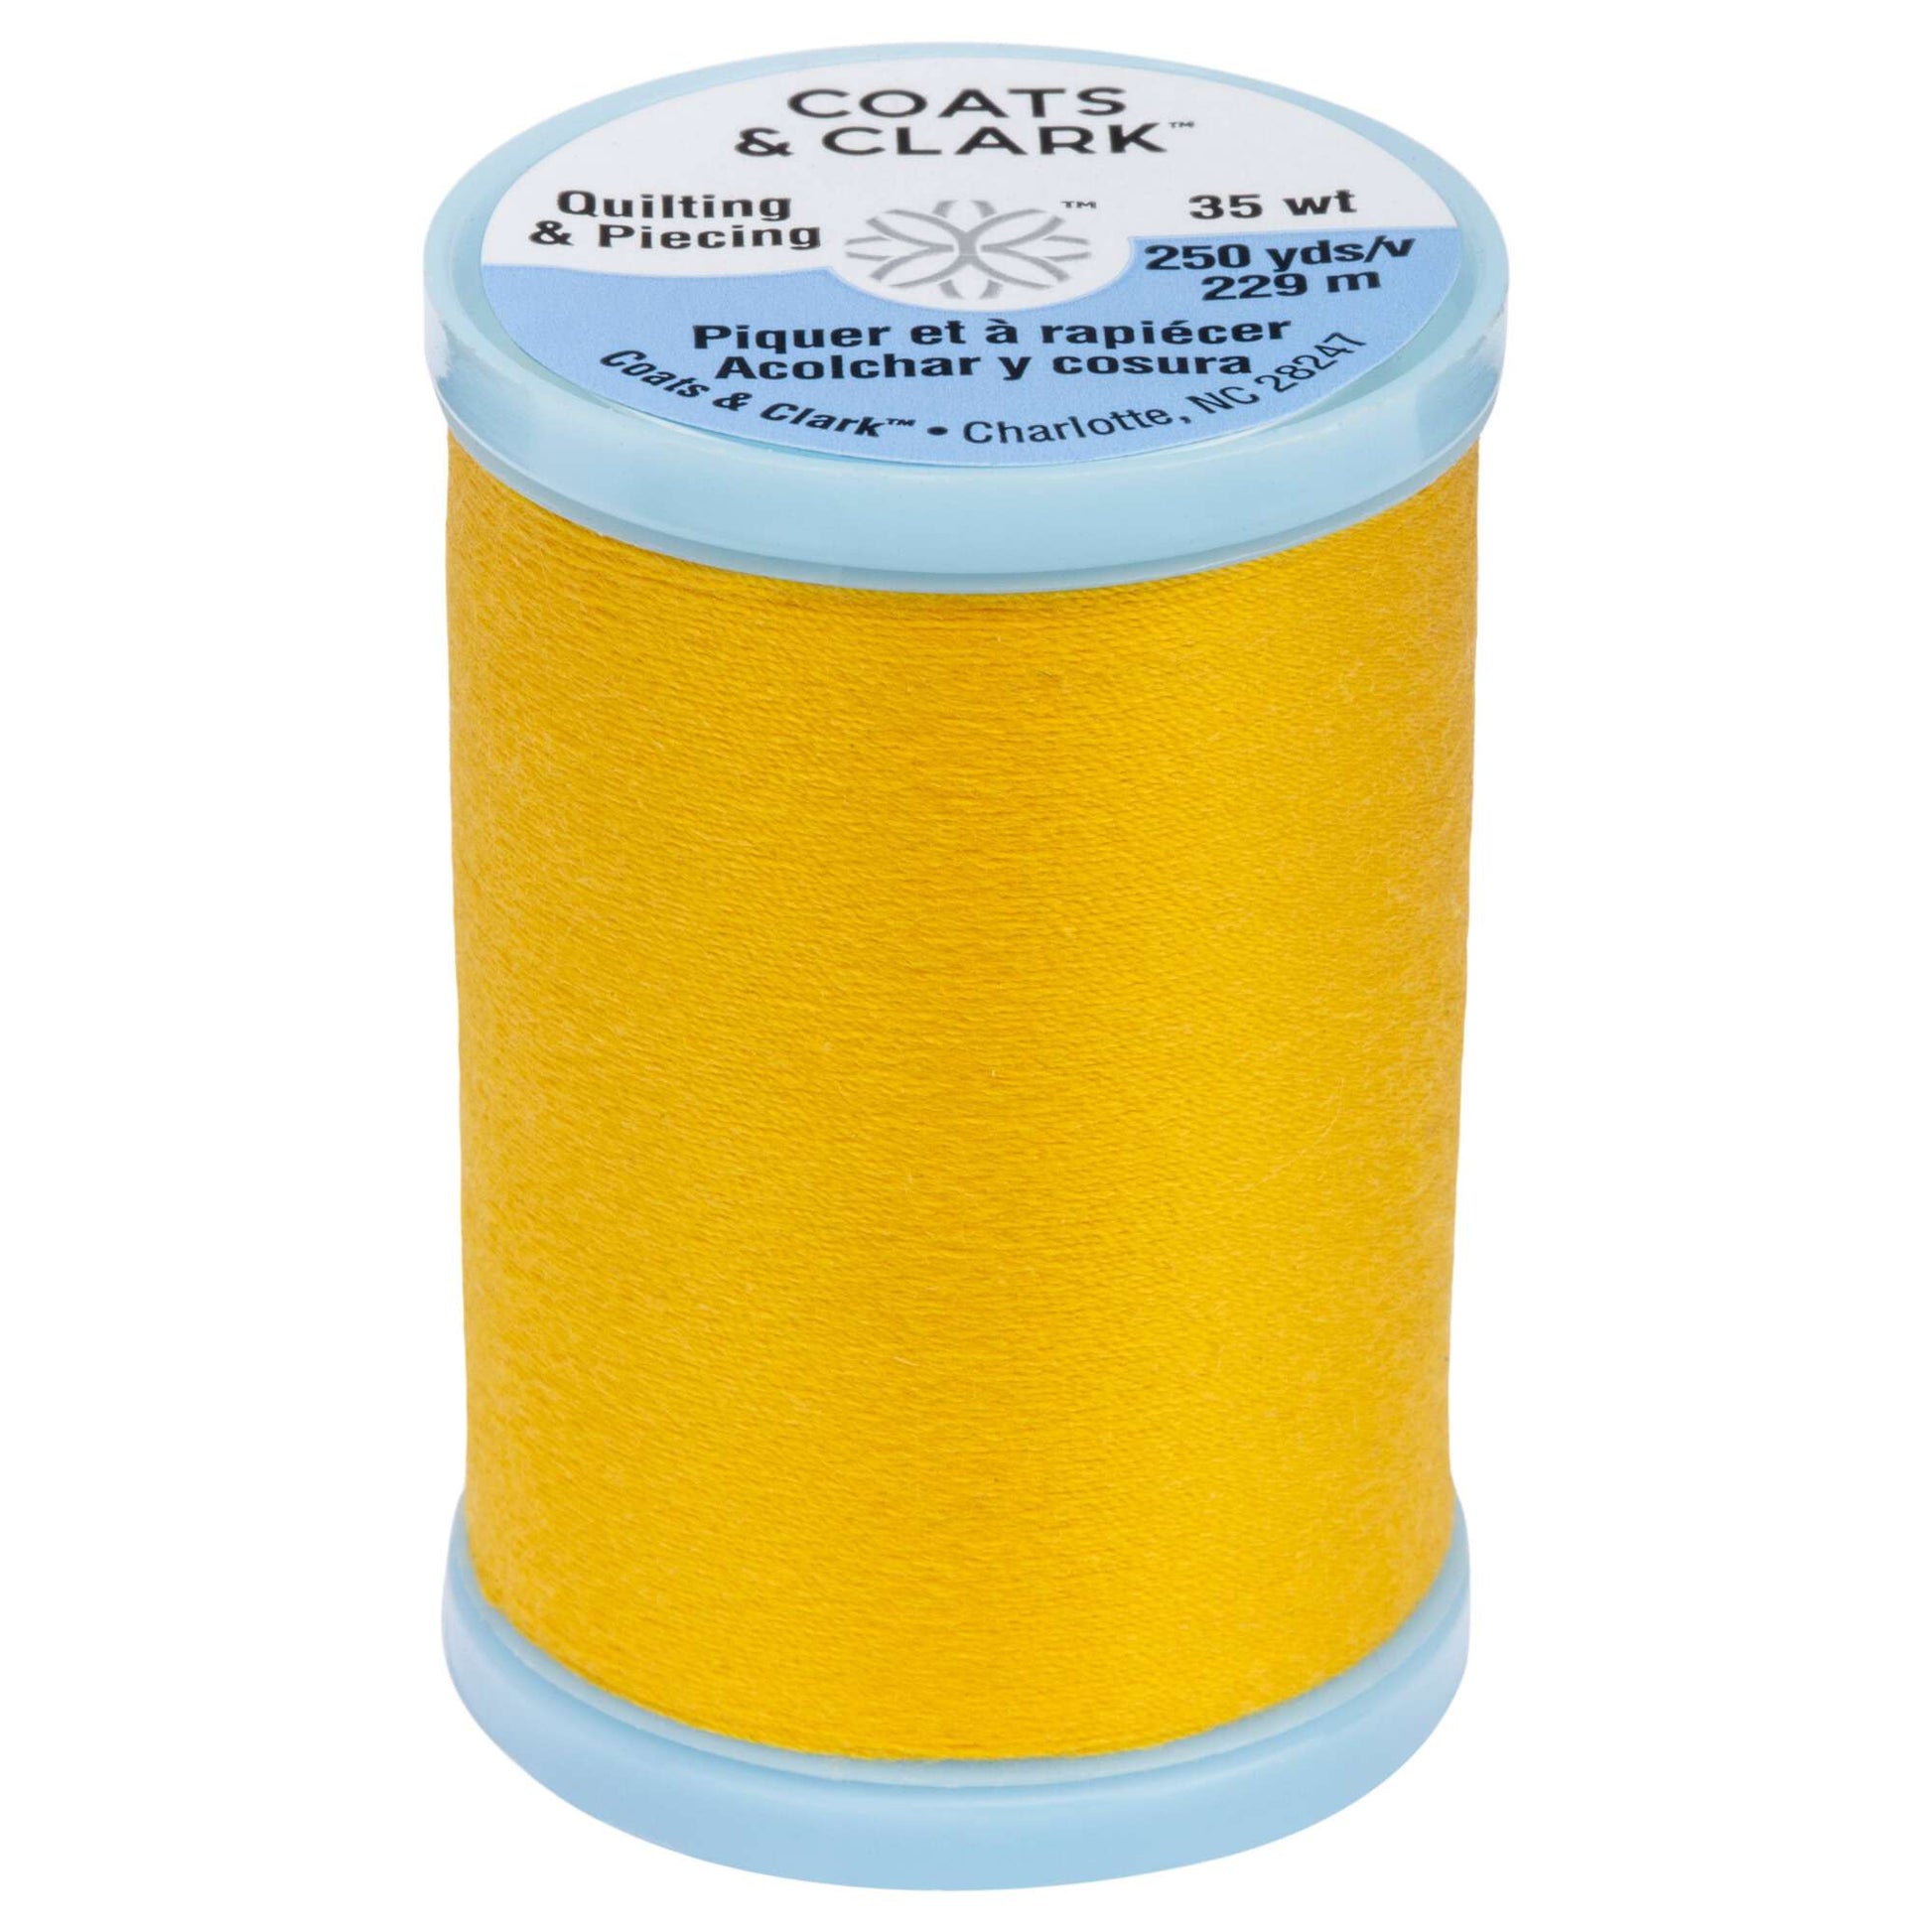 Coats & Clark Cotton Covered Quilting & Piecing Thread (250 Yards) Spark Gold